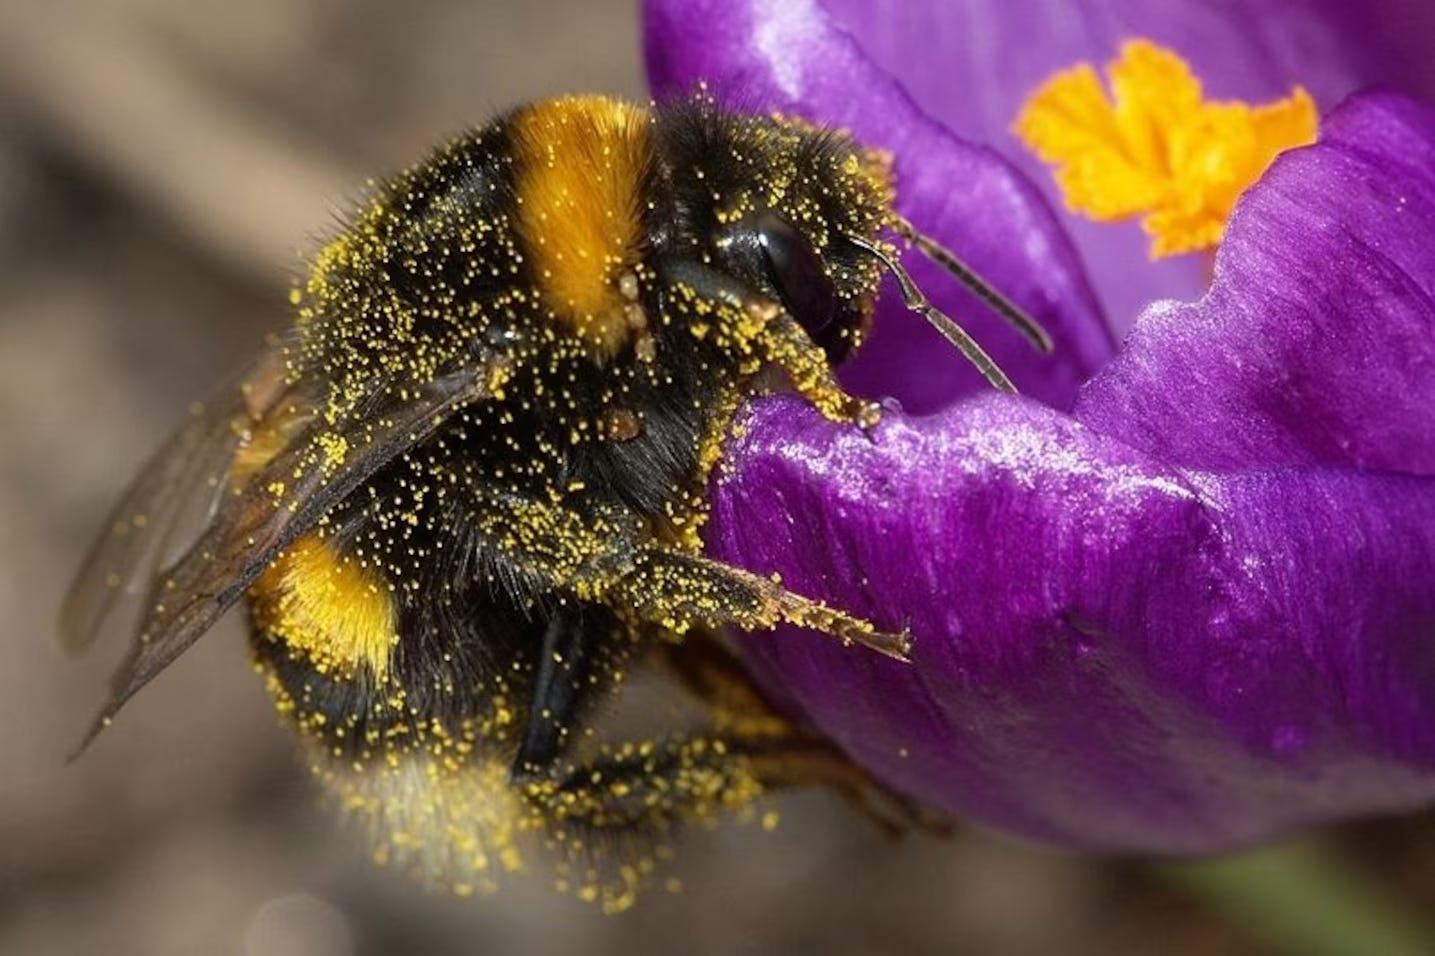 A bee, covered in pollen, dipping into a flower like a little freak.